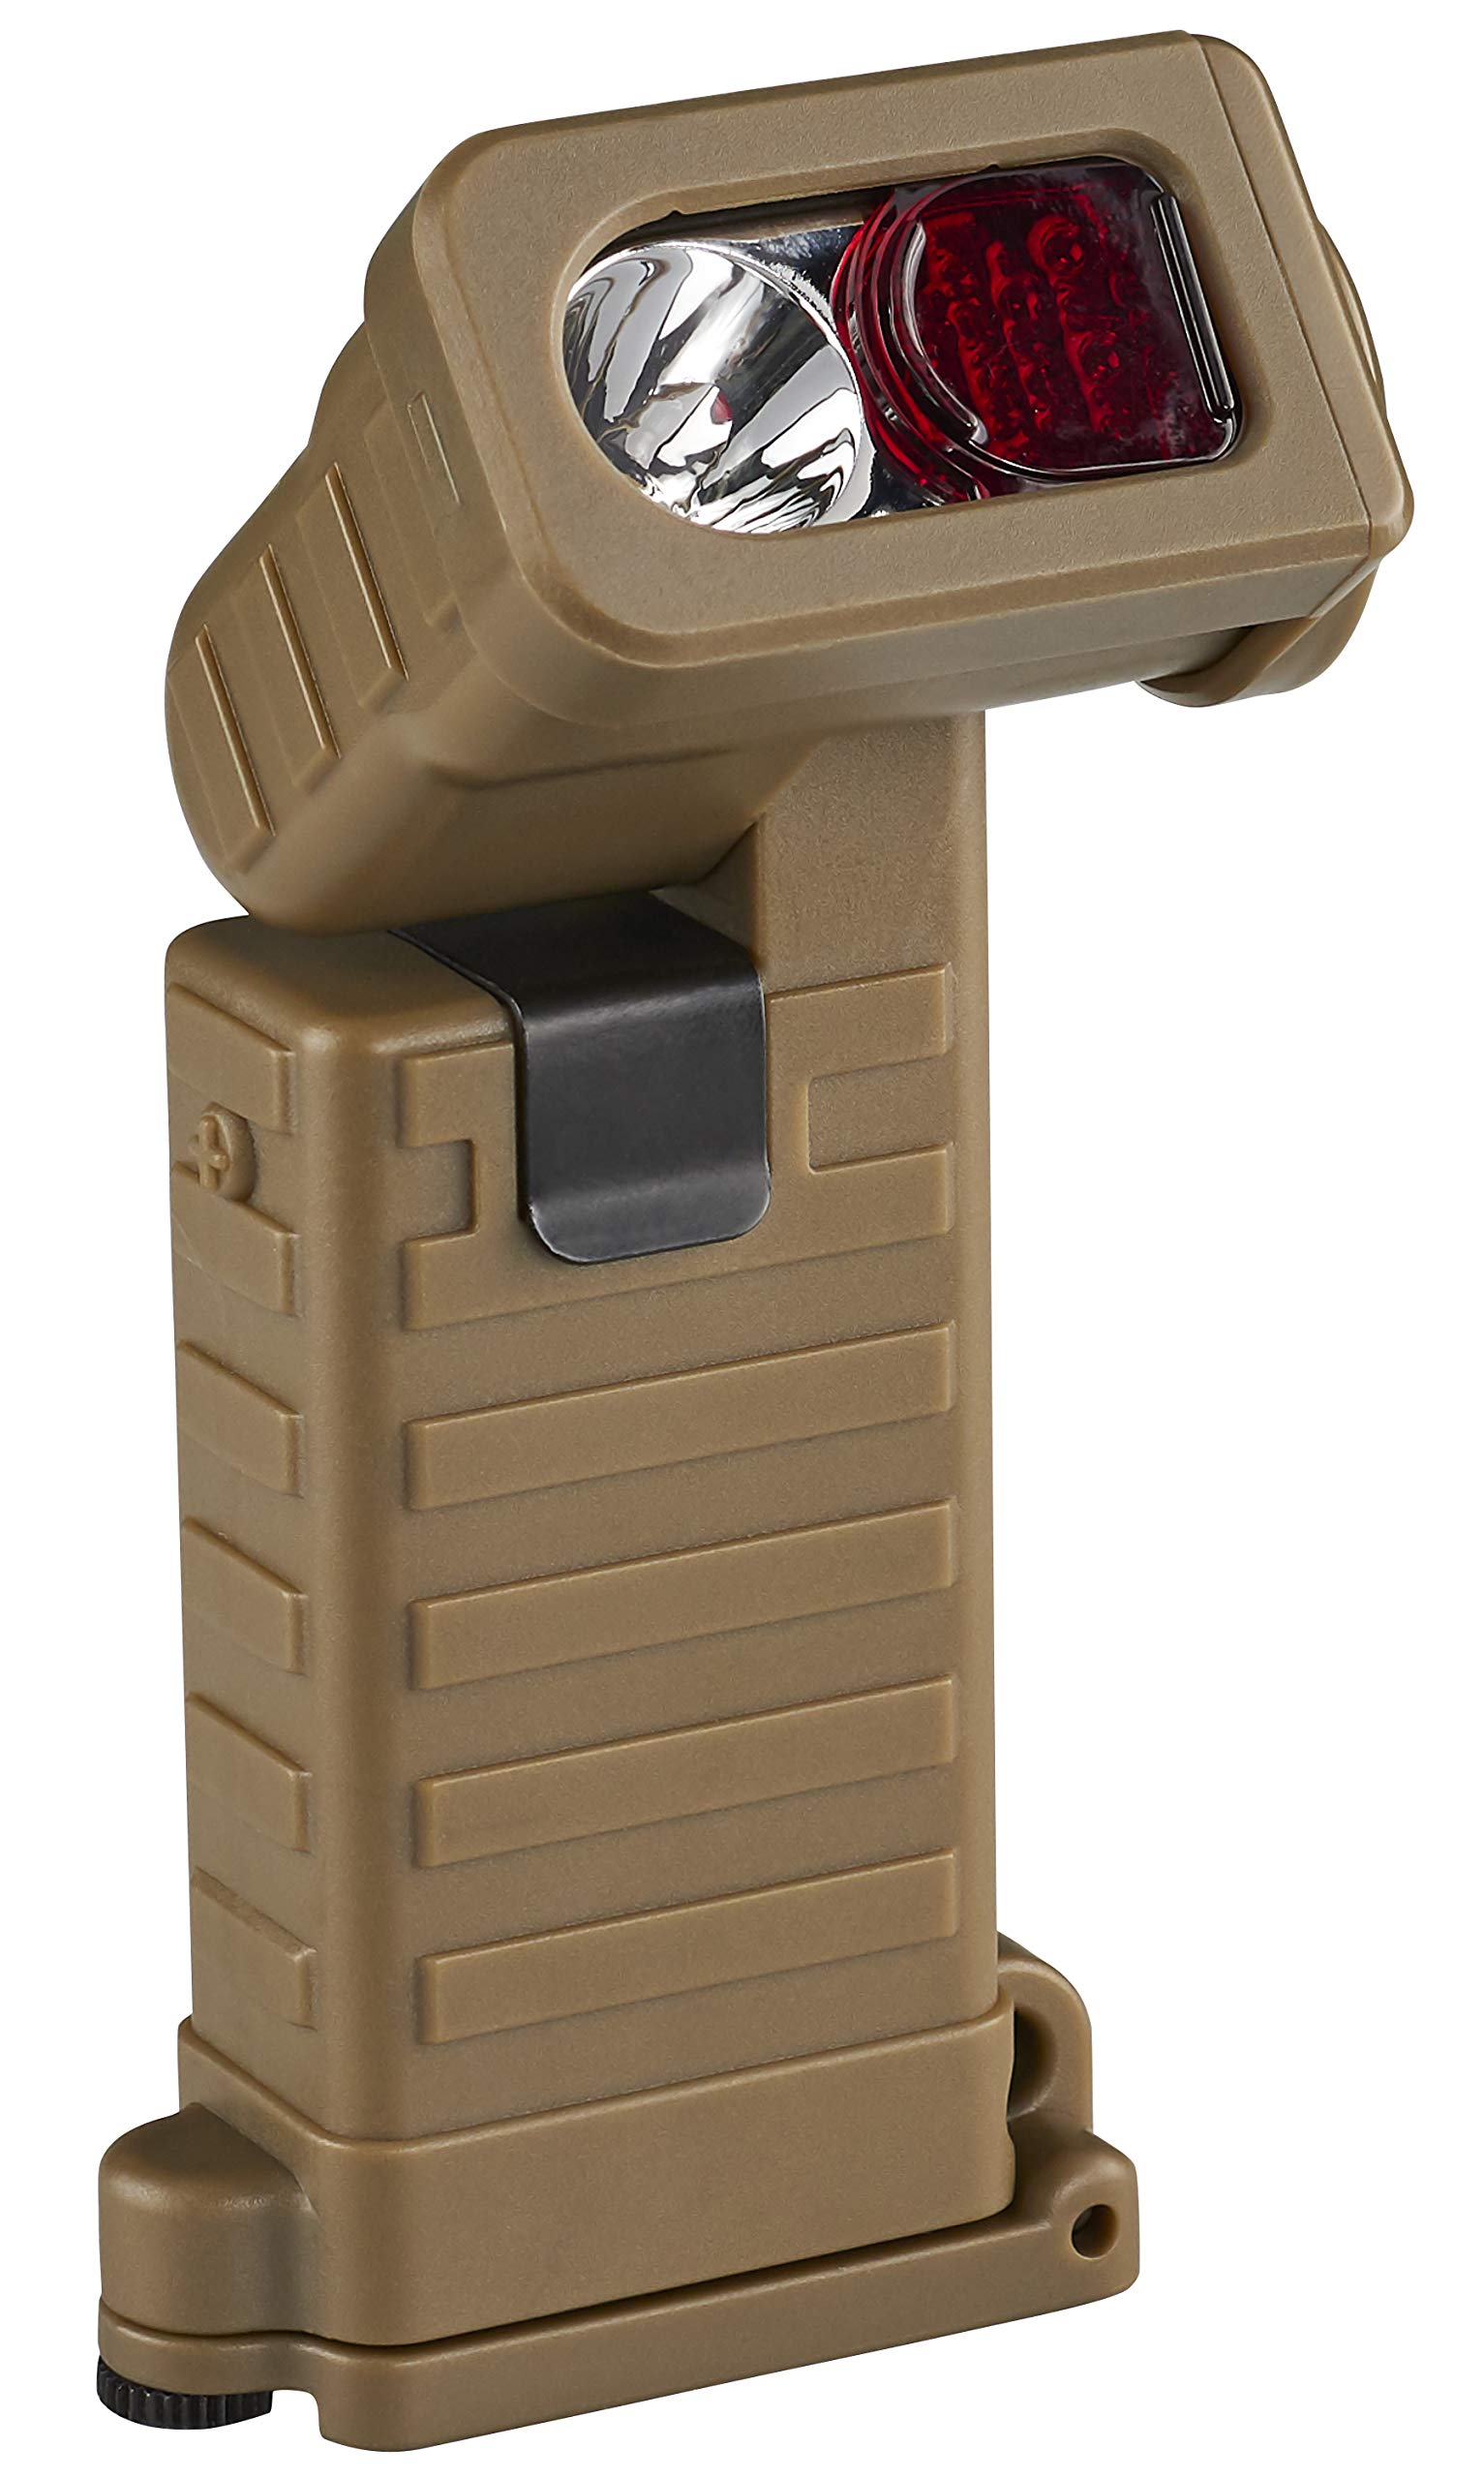 Streamlight 14975 Sidewinder Boot Military Light with 2 AA Alkaline Batteries, Coyote